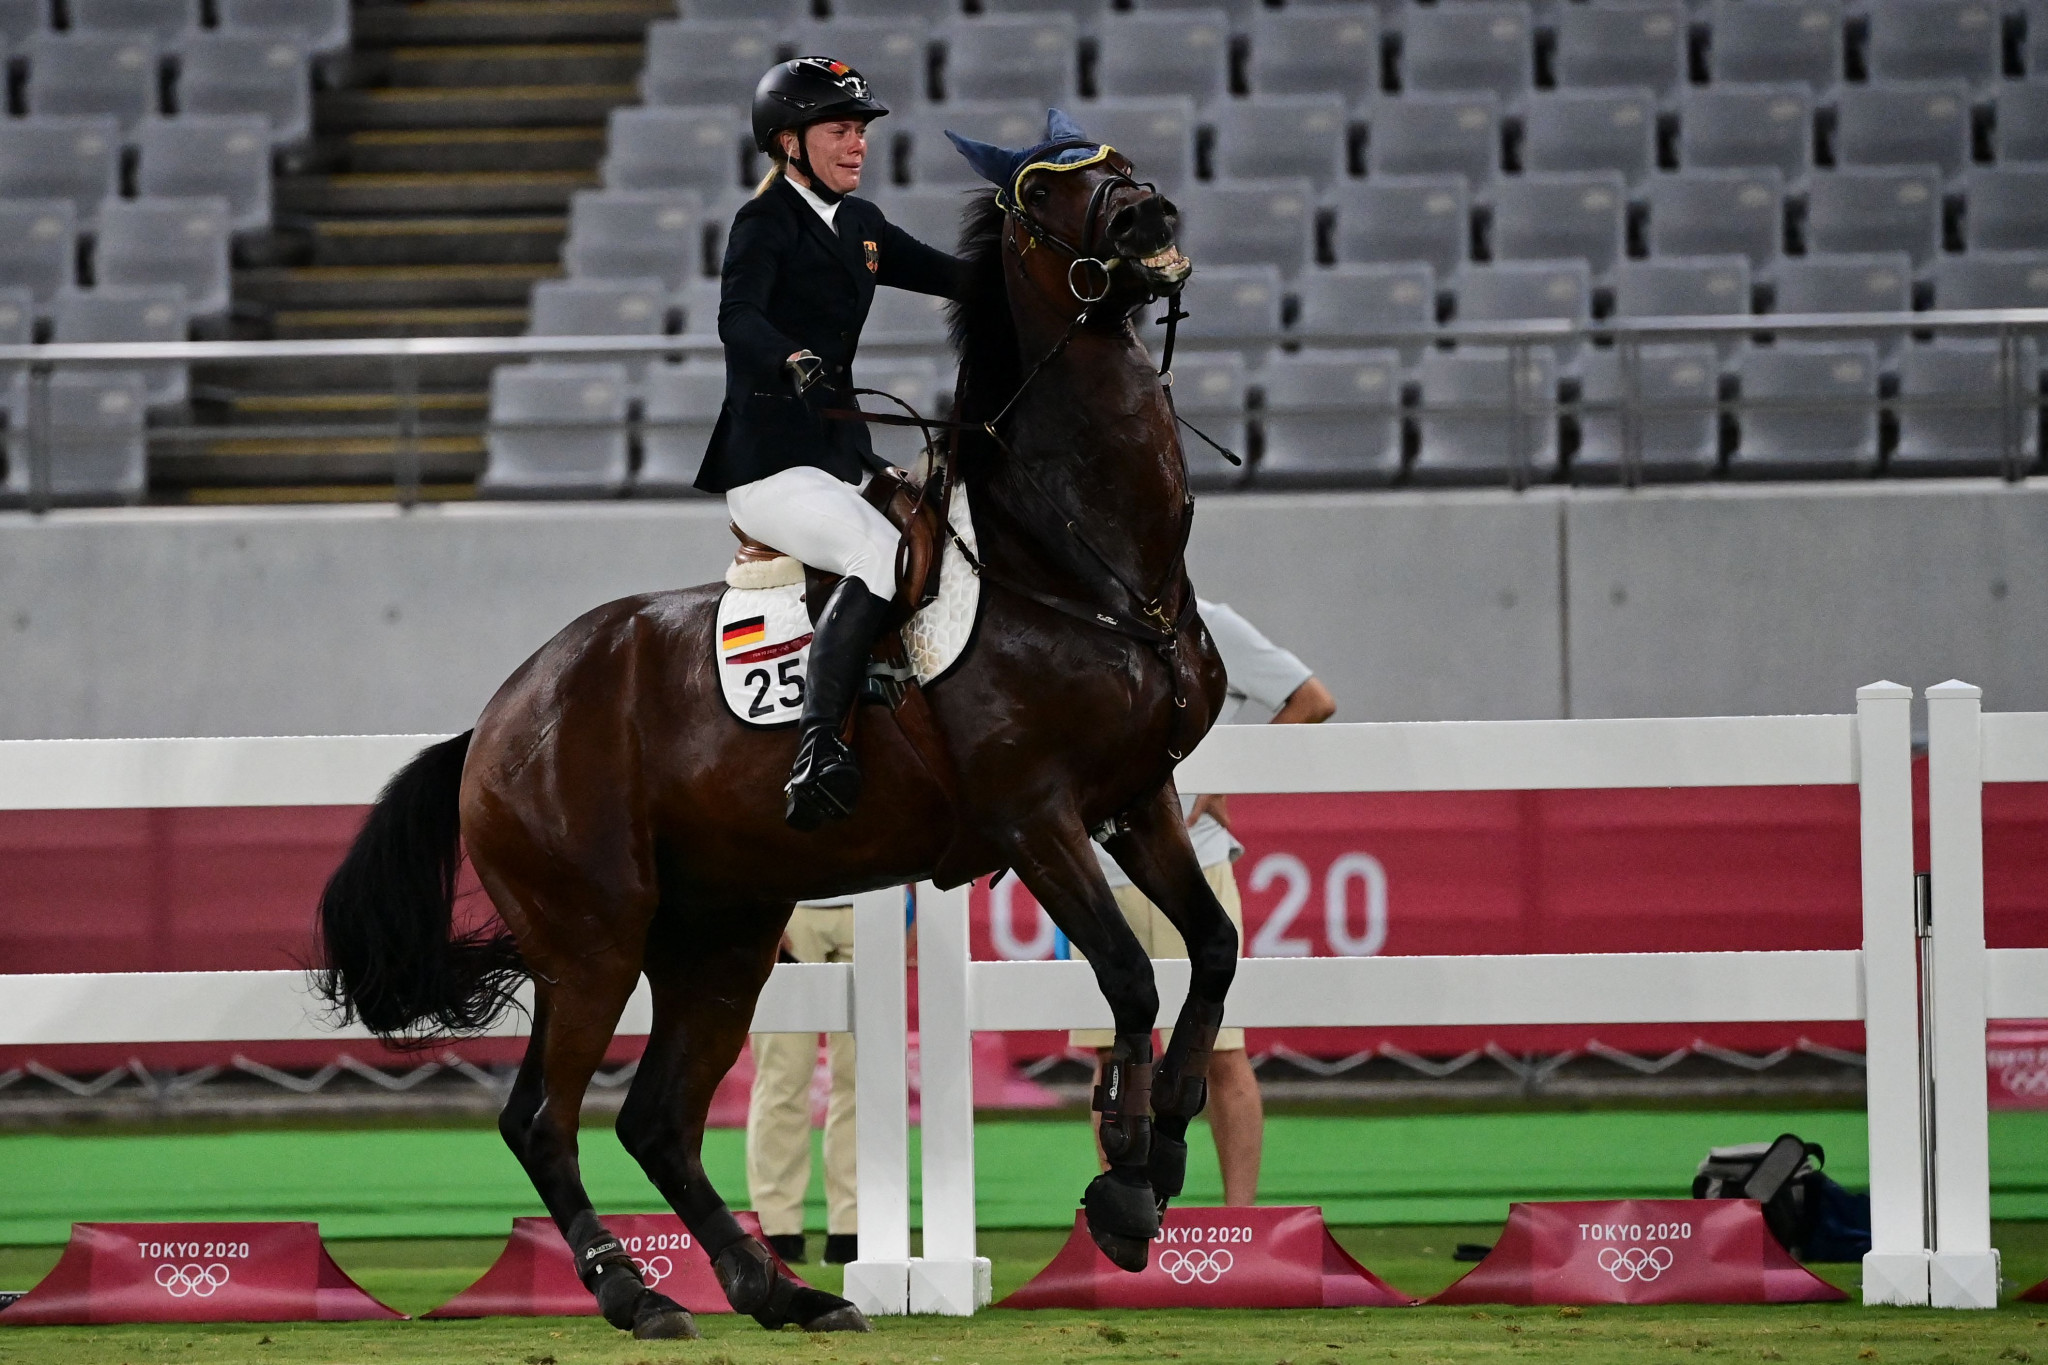 Saint-Boy refused to jump during the riding section of the modern pentathlon competition at the Tokyo 2020 Olympics which sparked the decision to drop riding ©Getty Images